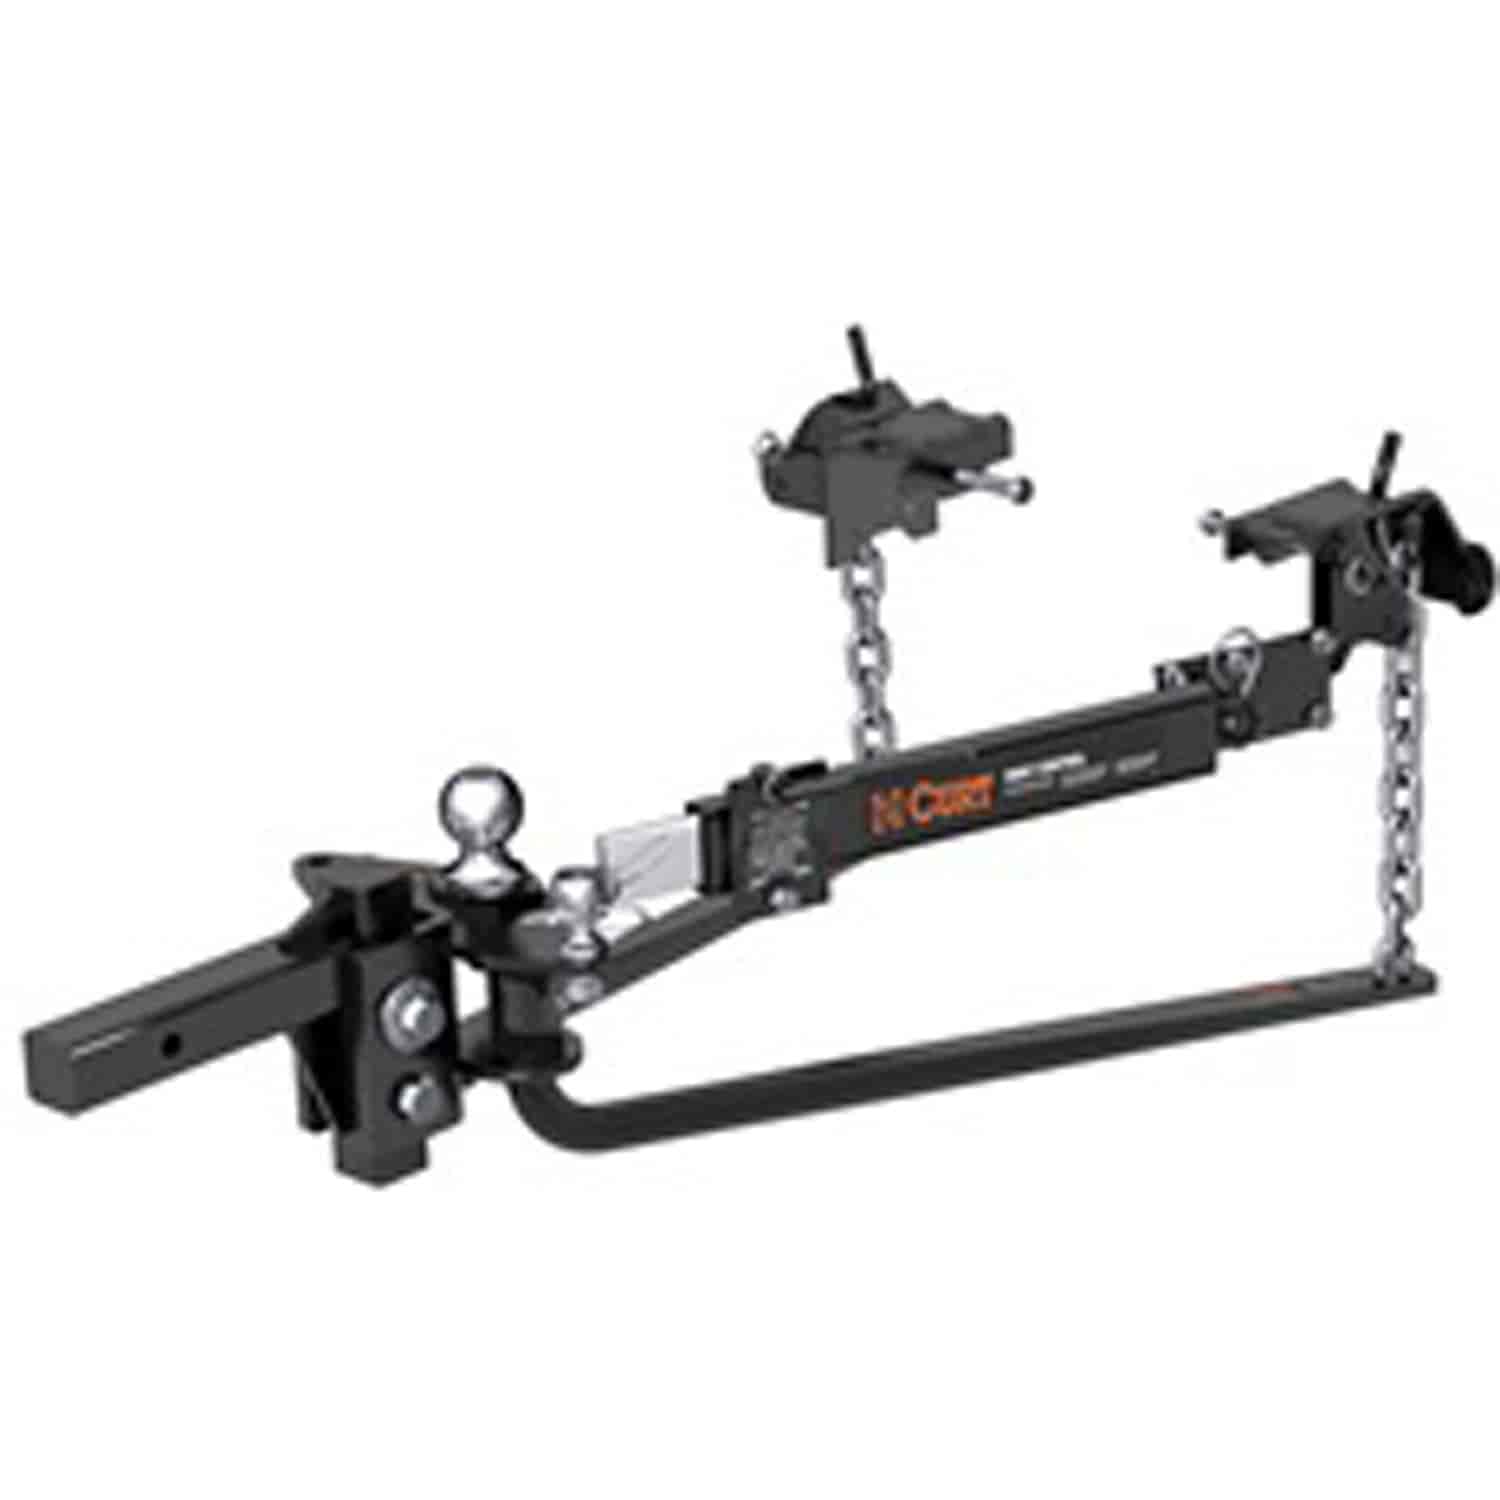 WEIGHT DISTRIBUTION KIT WITH BALL AND SWAY CONTROL 1 400 LB CAPACITY